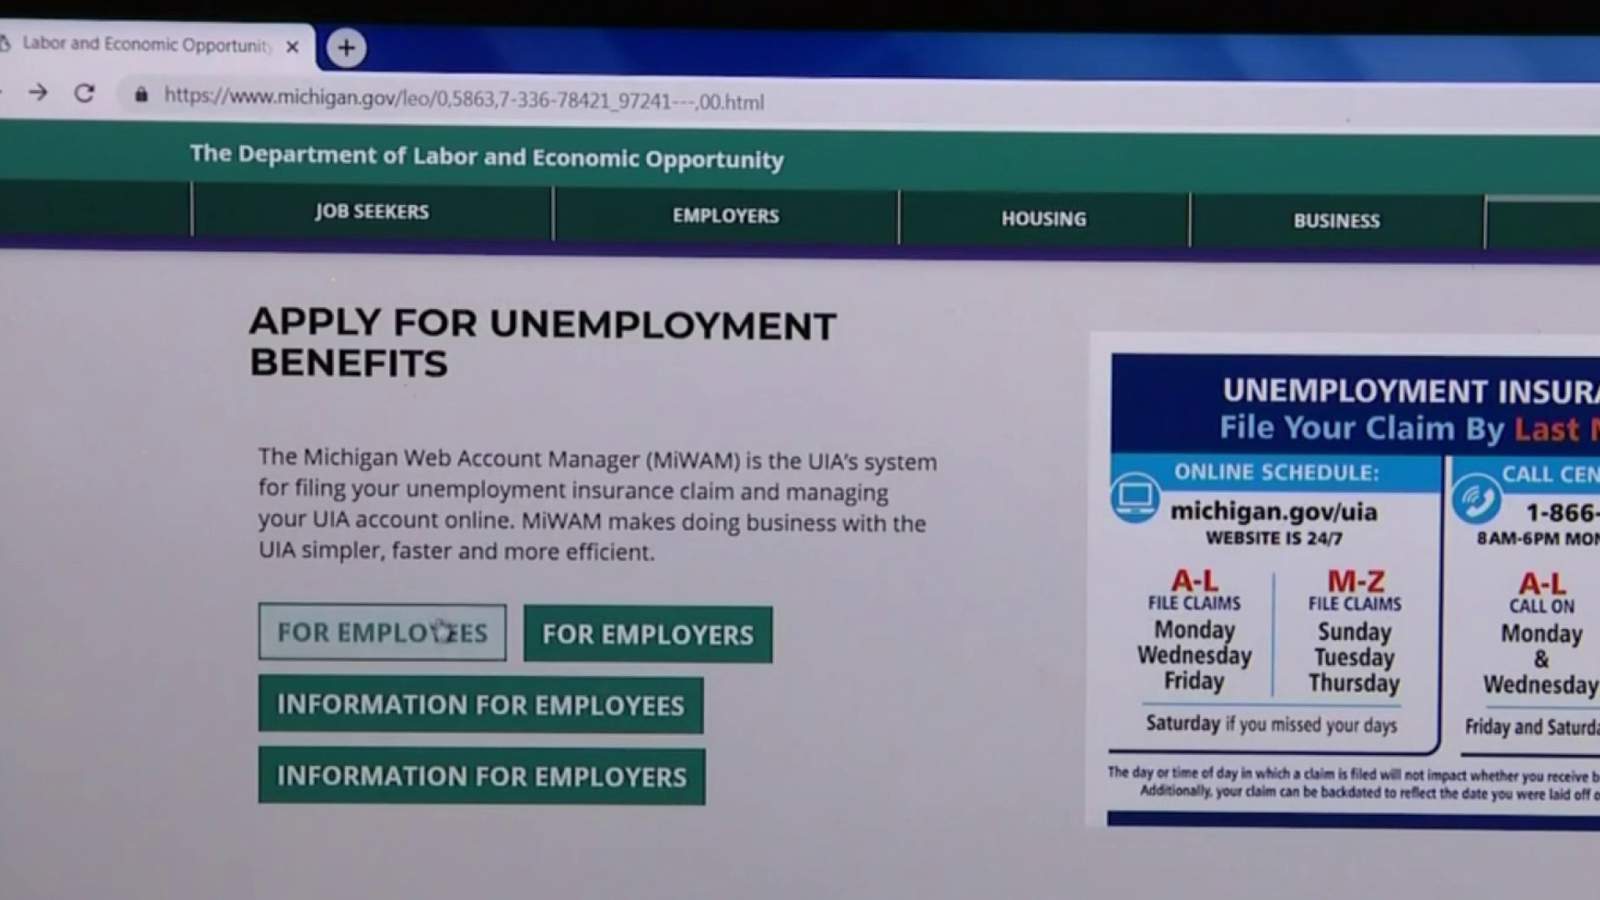 Michiganders could lose unemployment benefits if no action is taken in next few days, Whitmer says